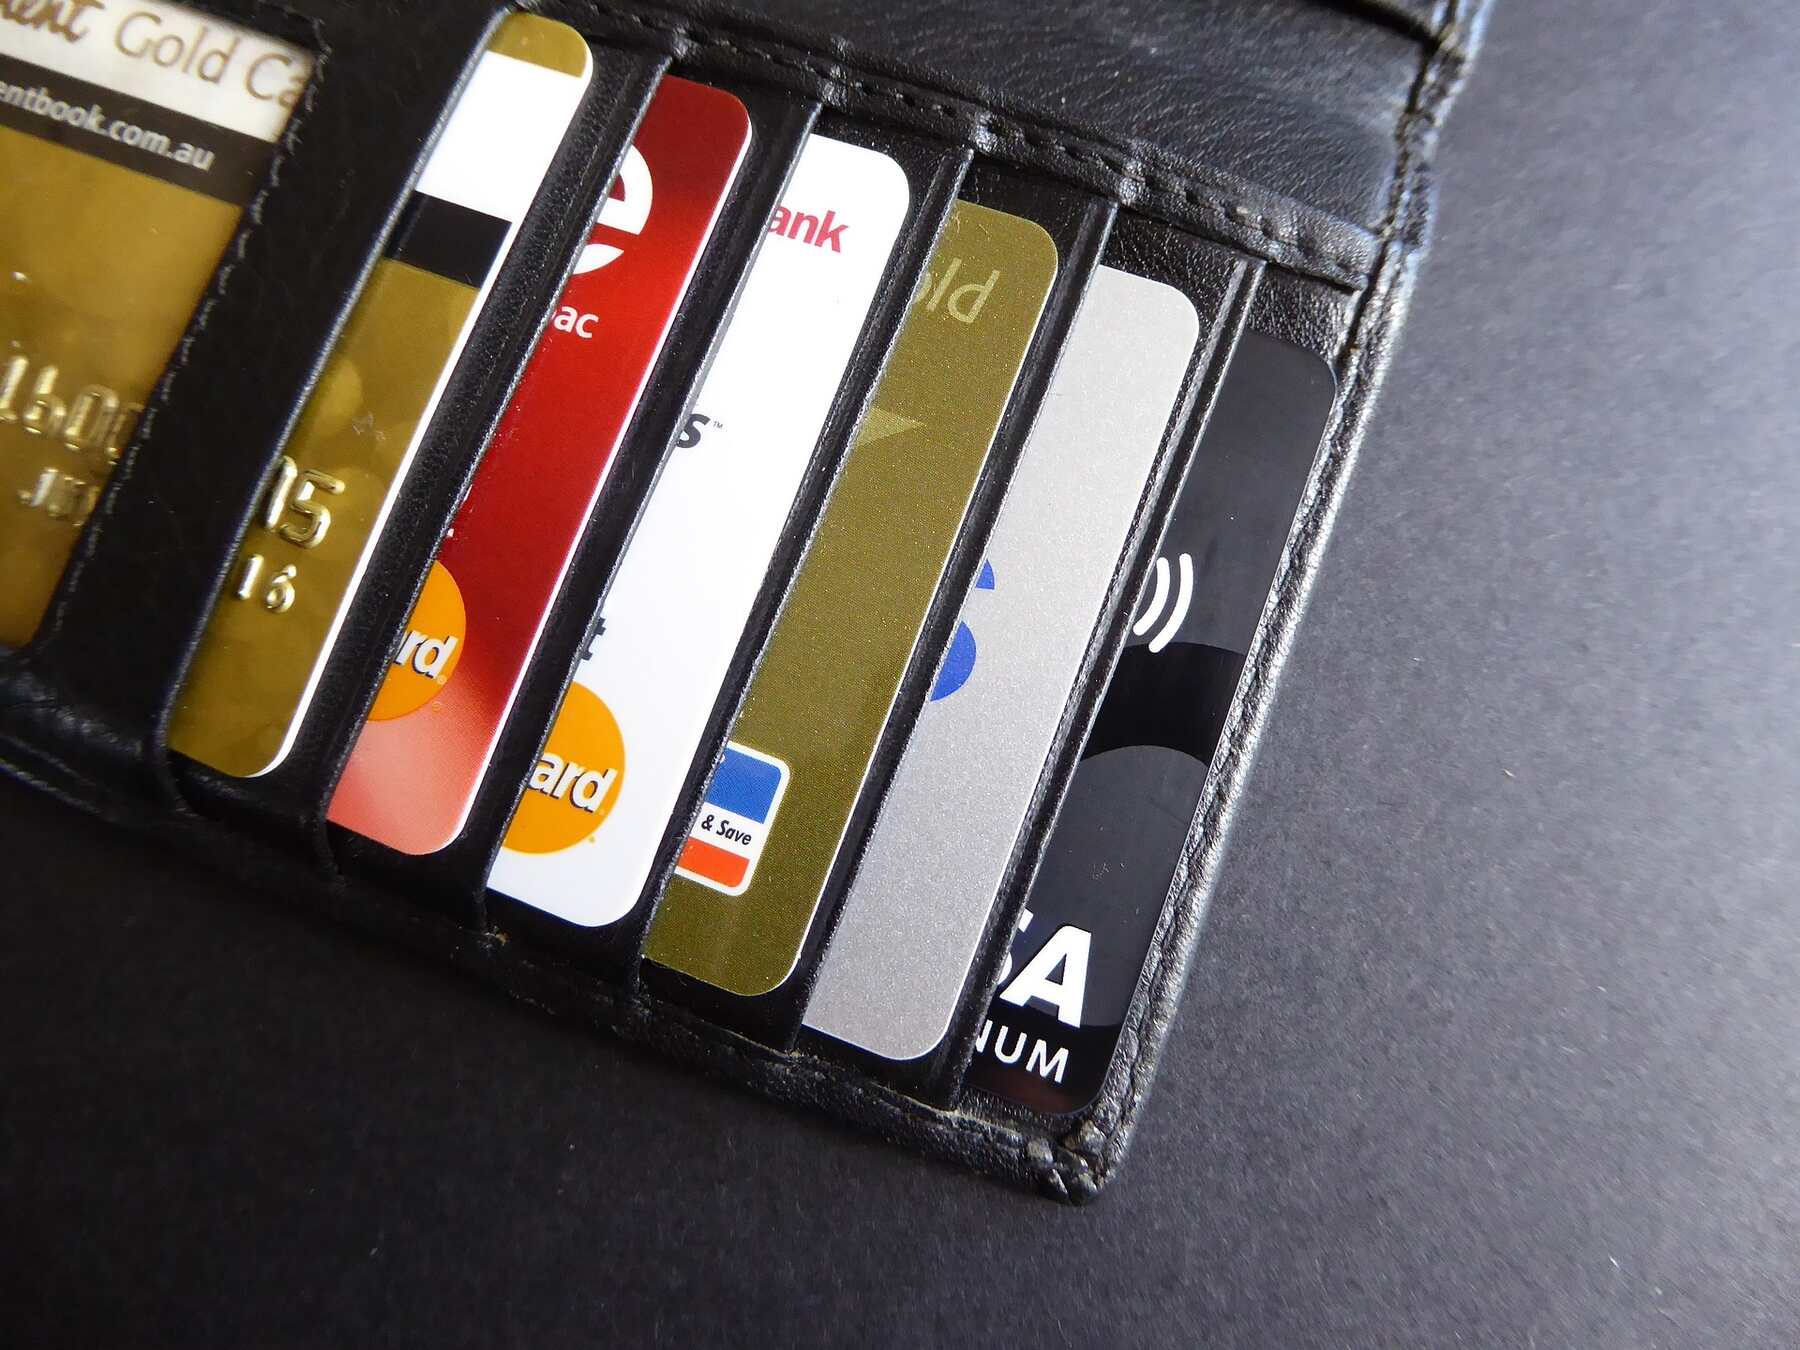 Credit cards neatly arranged in a black leather wallet